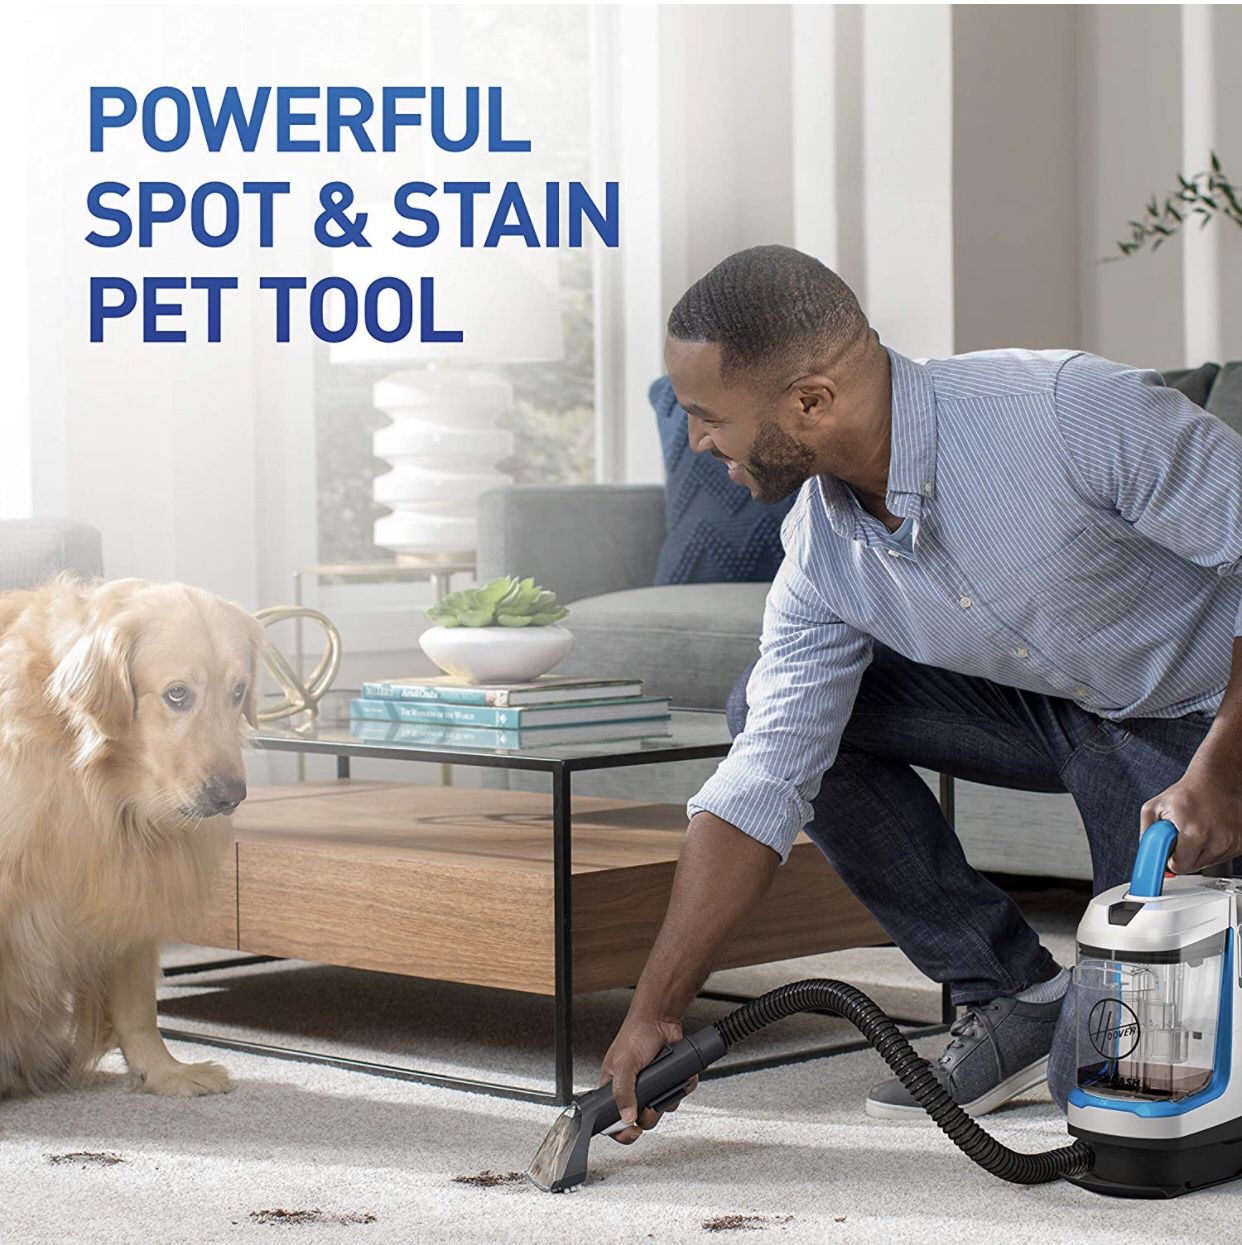 NEW! Hoover PowerDash GO Pet Portable Spot and Stain Cleaner - FH13000